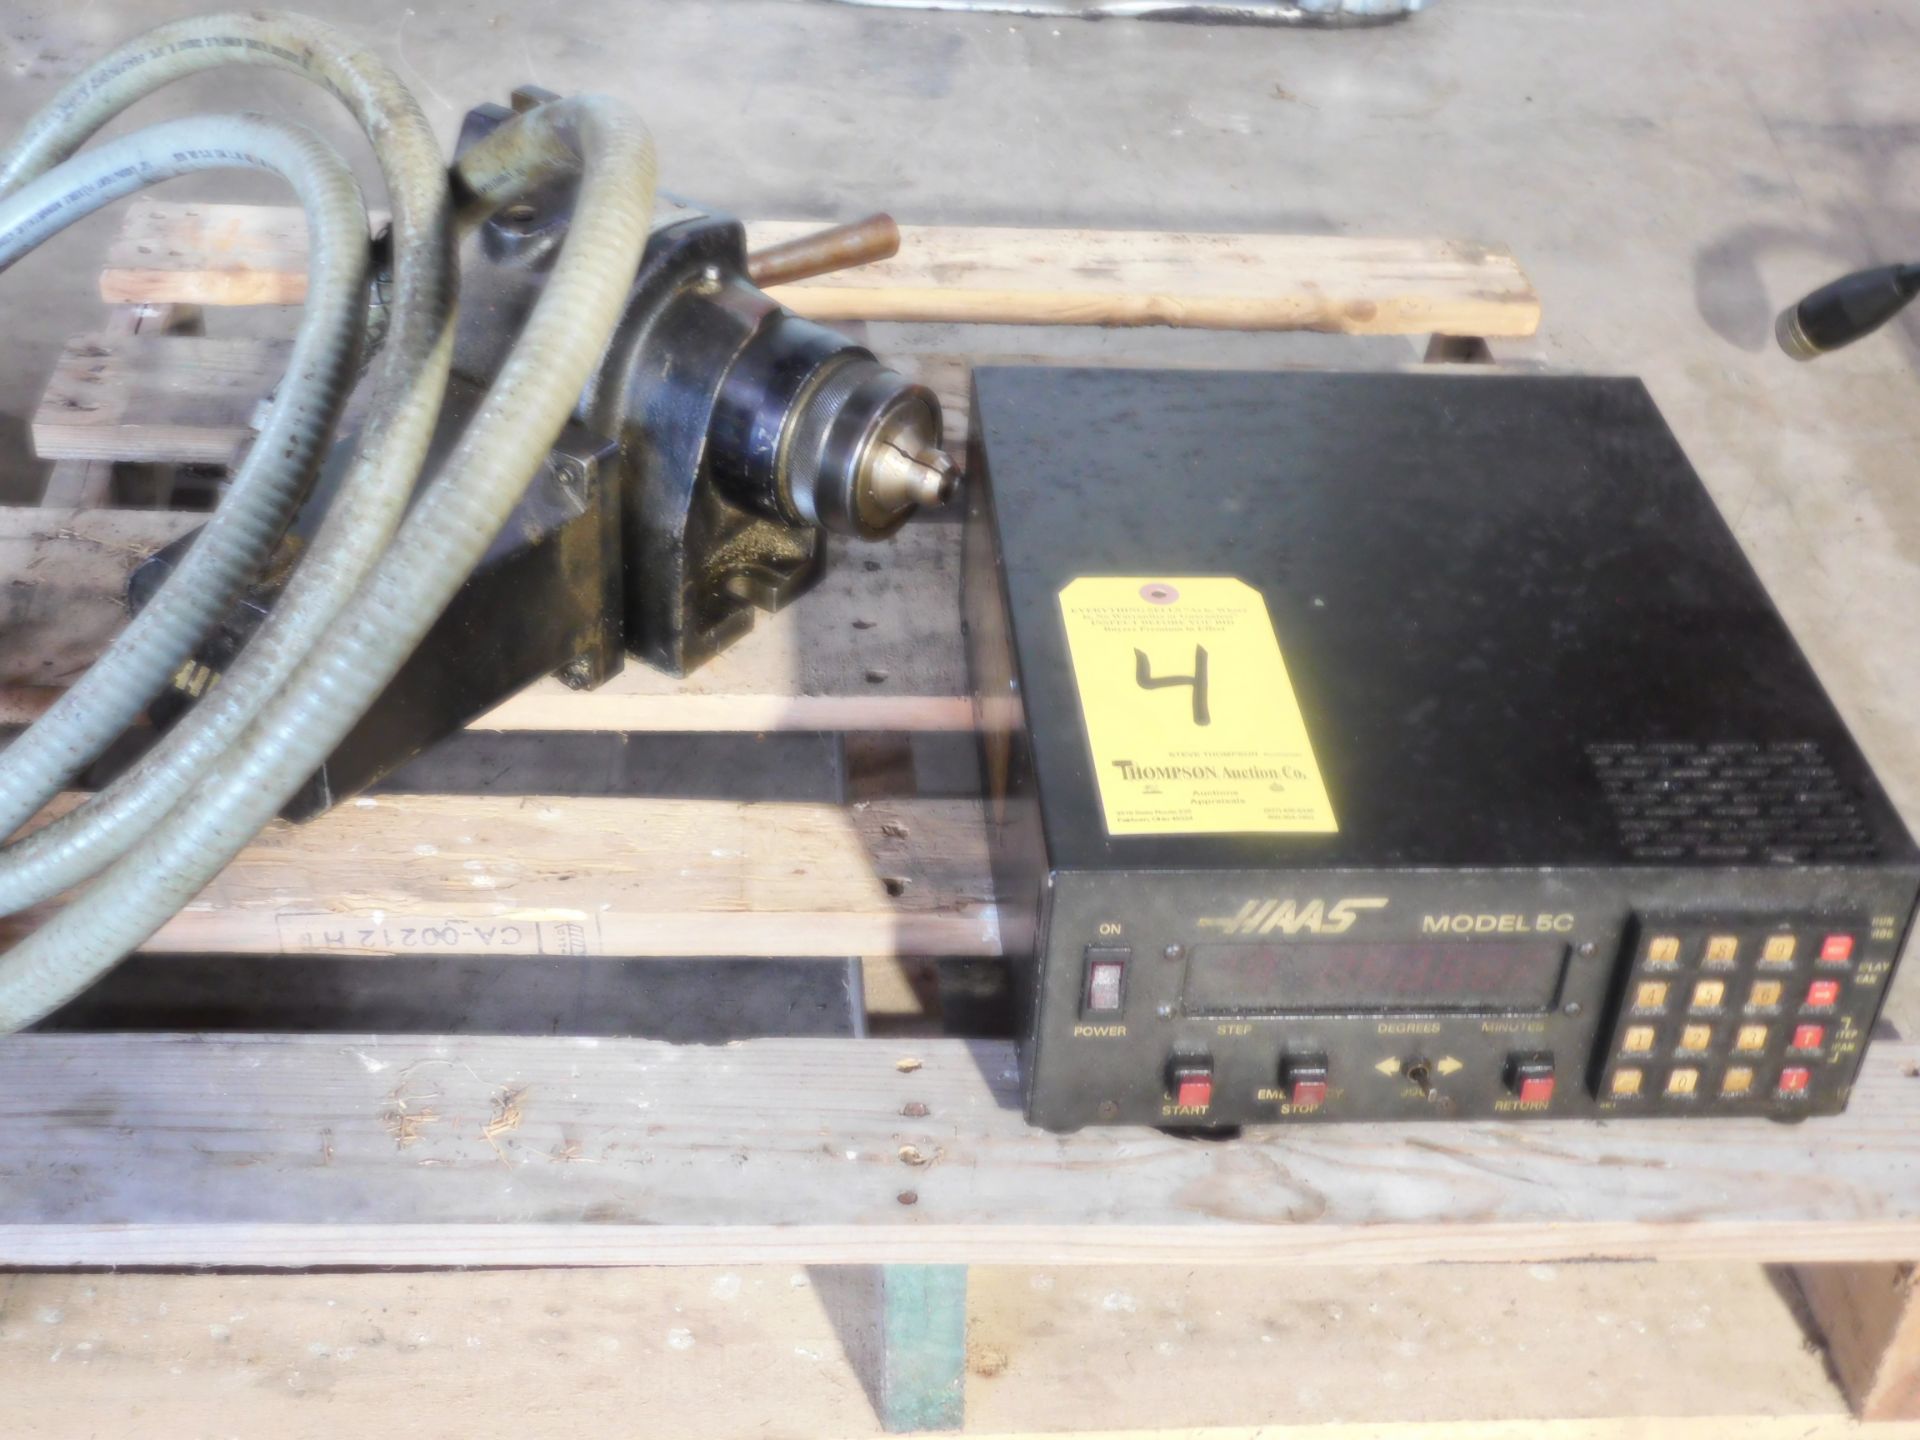 Haas HA5C Indexer, with Control Box